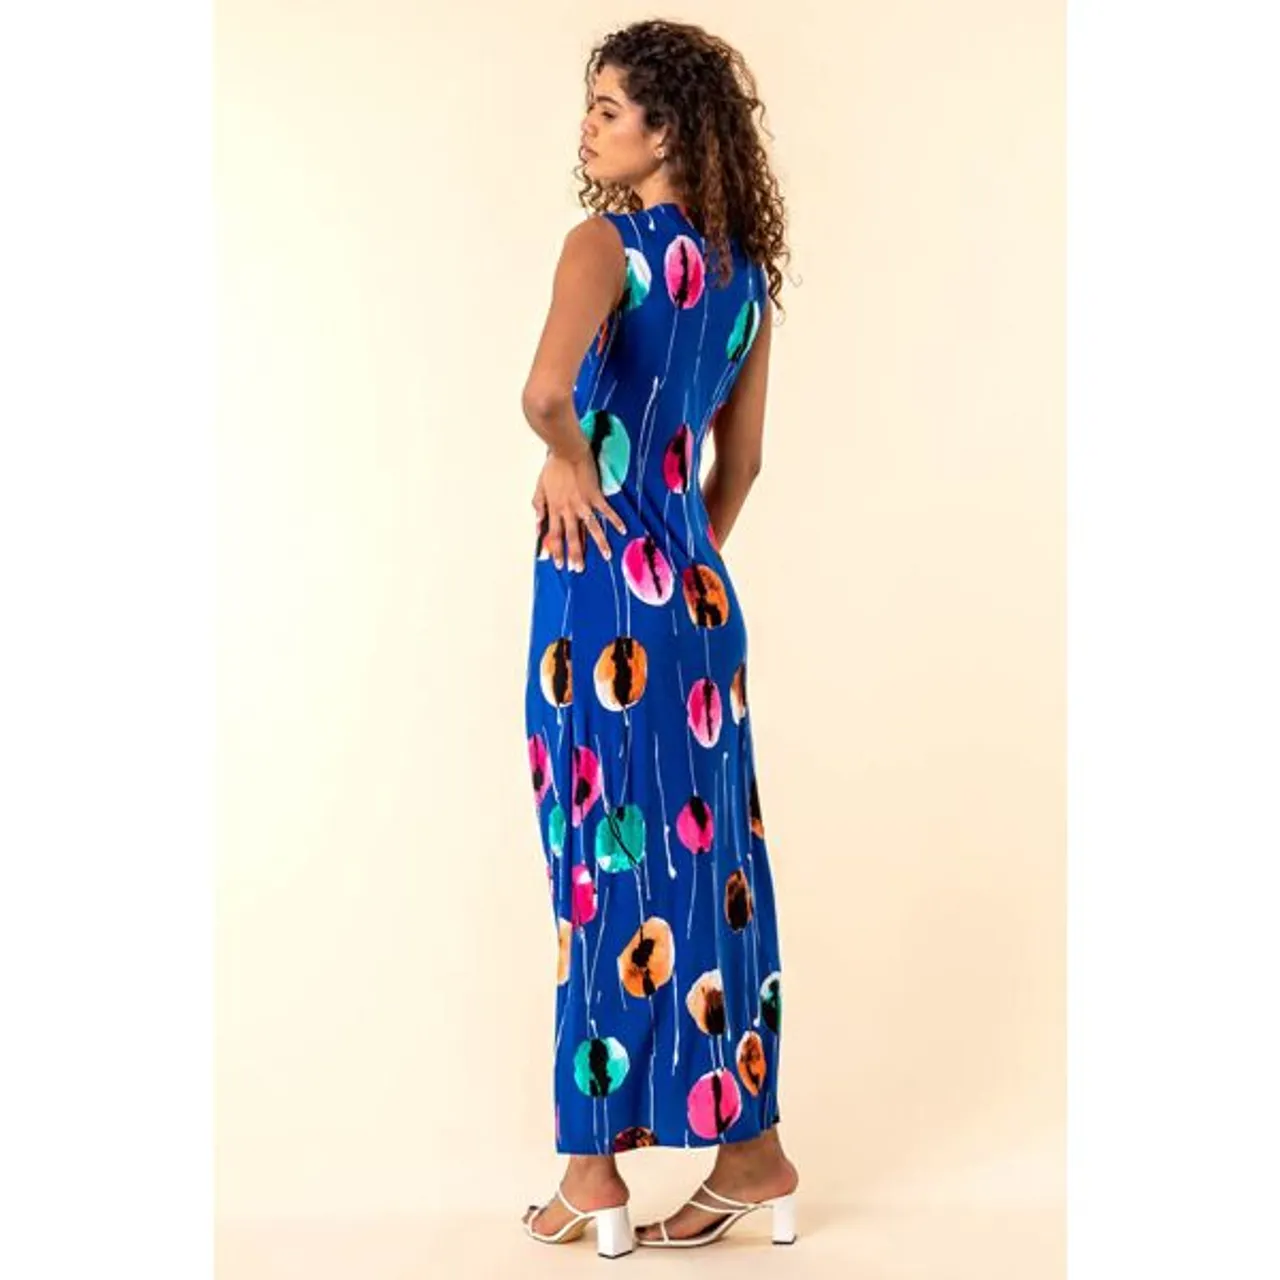 Roman Abstract Floral Print Twist Waist Maxi Dress in Royal Blue - Size 10 10 female